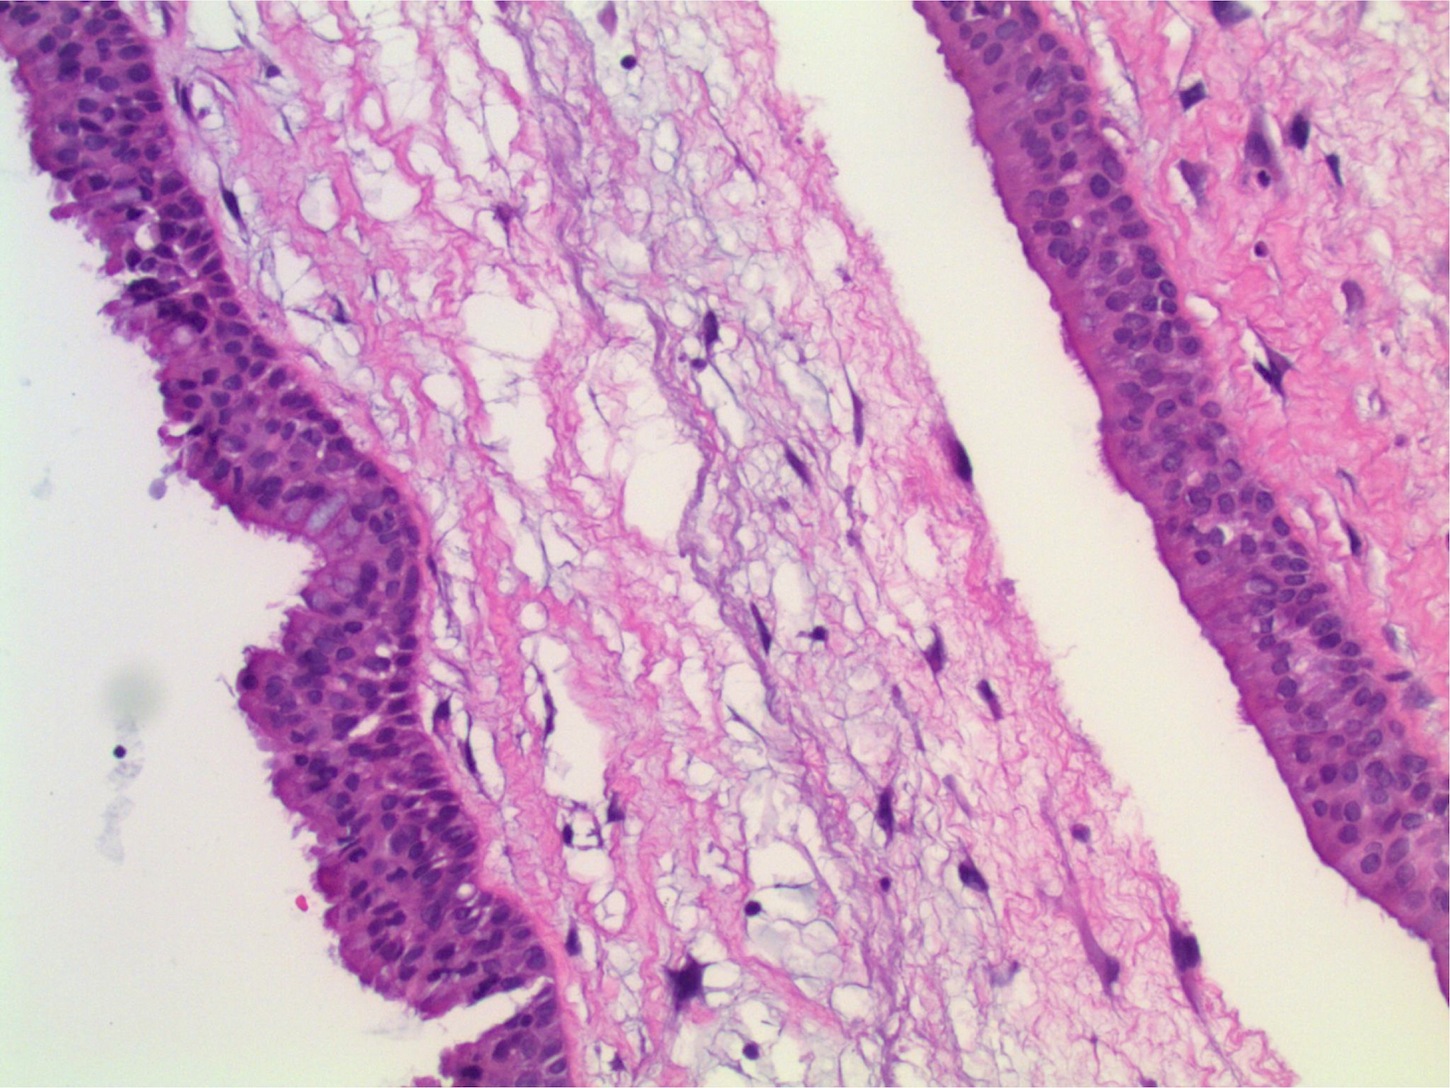 investing papilloma picture